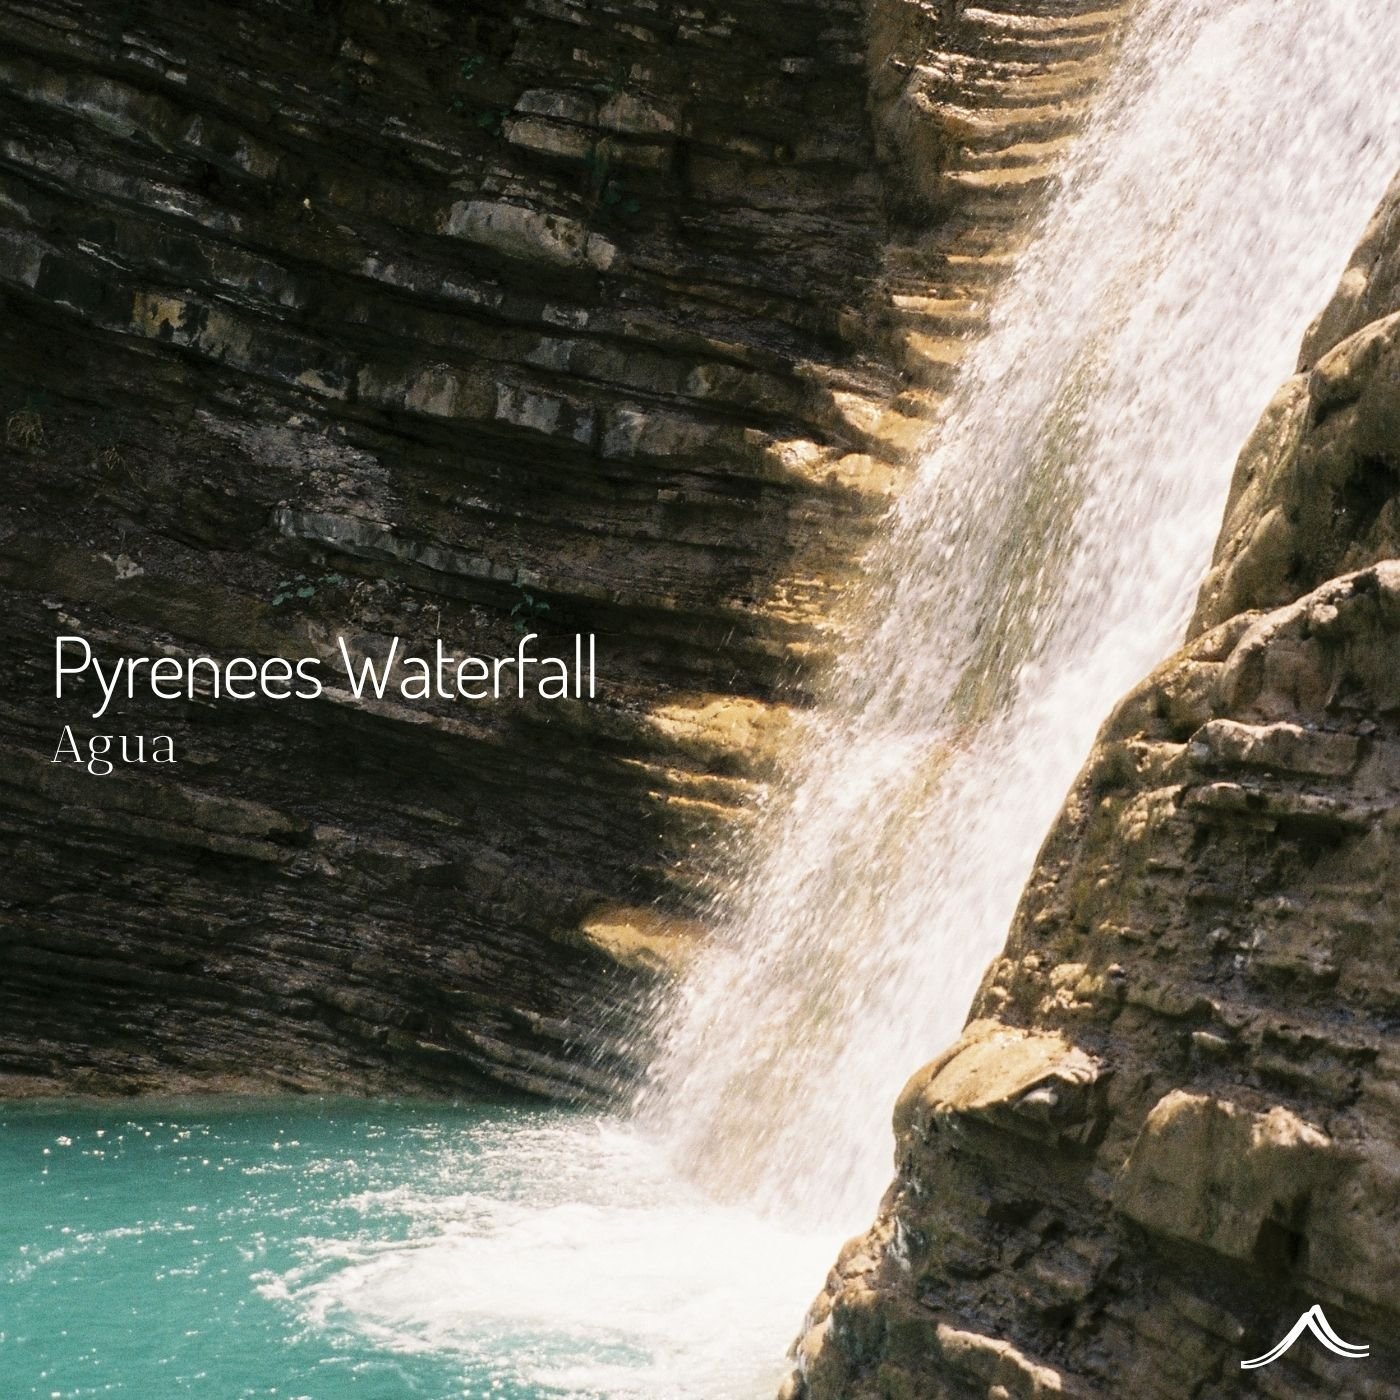 🌊 Unveiling my new track 'Pyrenees Waterfall' 🎶 

Inspired by the hidden gem of a majestic waterfall in the heart of the Pyrenees, this field recording captures the raw power and enchanting nature created by the rushing water.

Listen via my Agua p